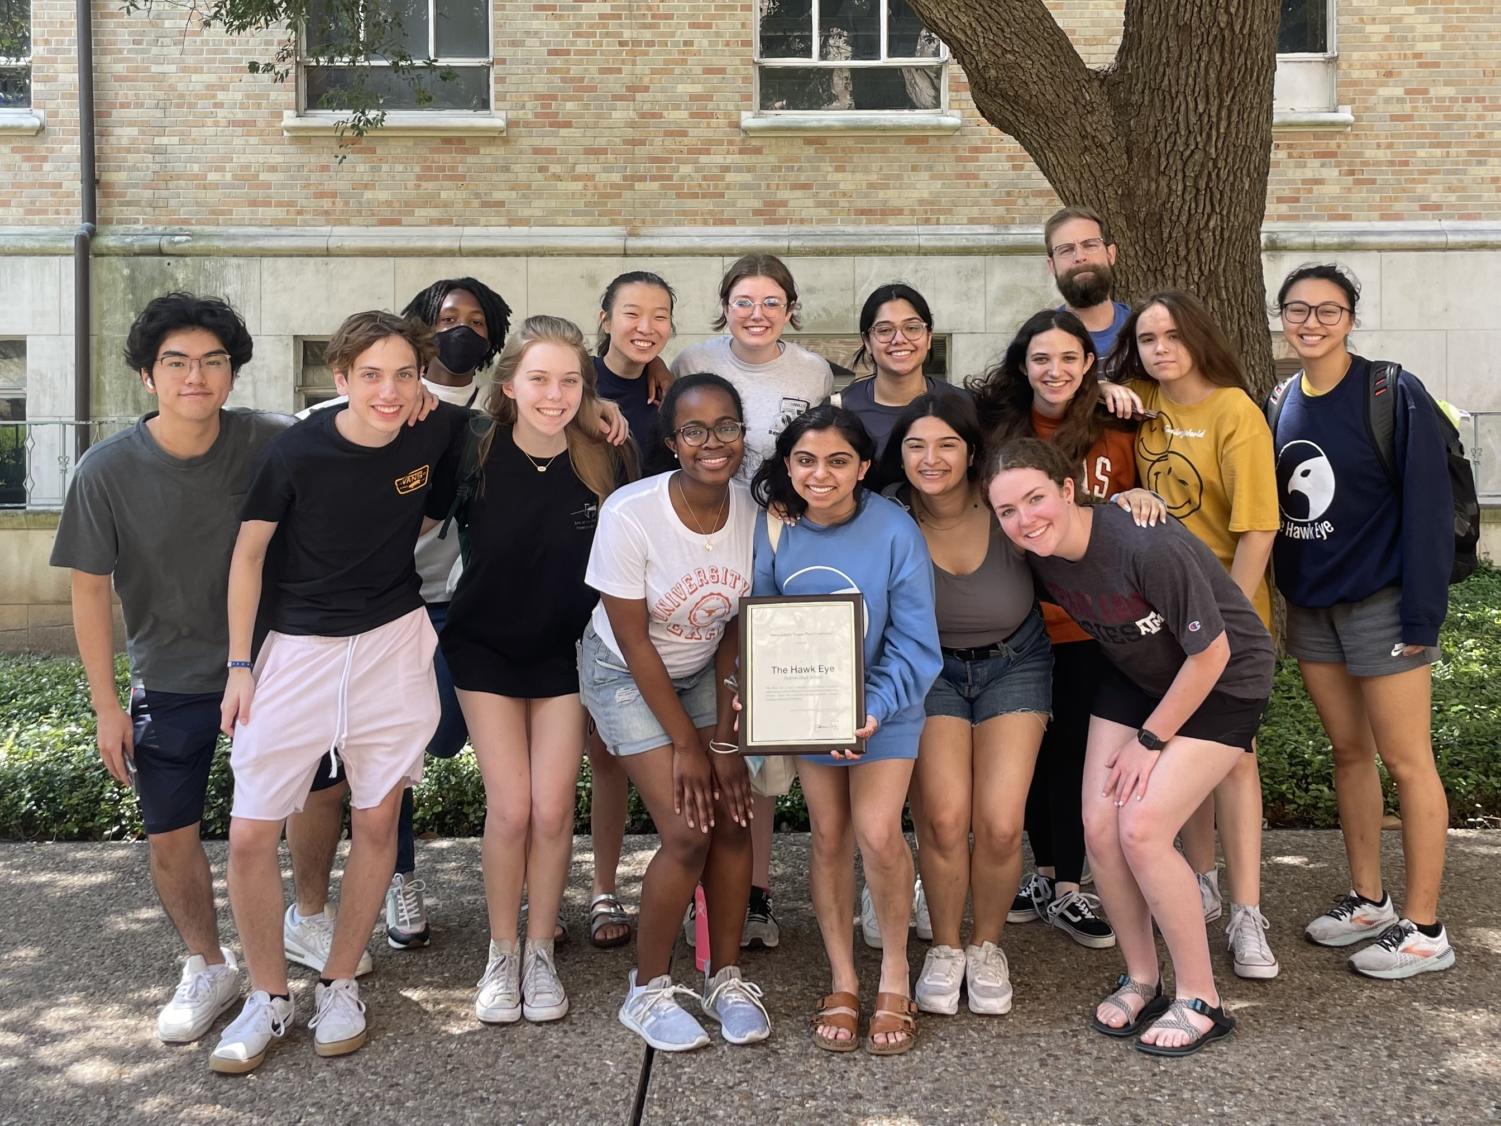 The newspaper staff poses with an award during our trip to Austin. I have found a community and a family outside my home with my amazing newspaper friends.